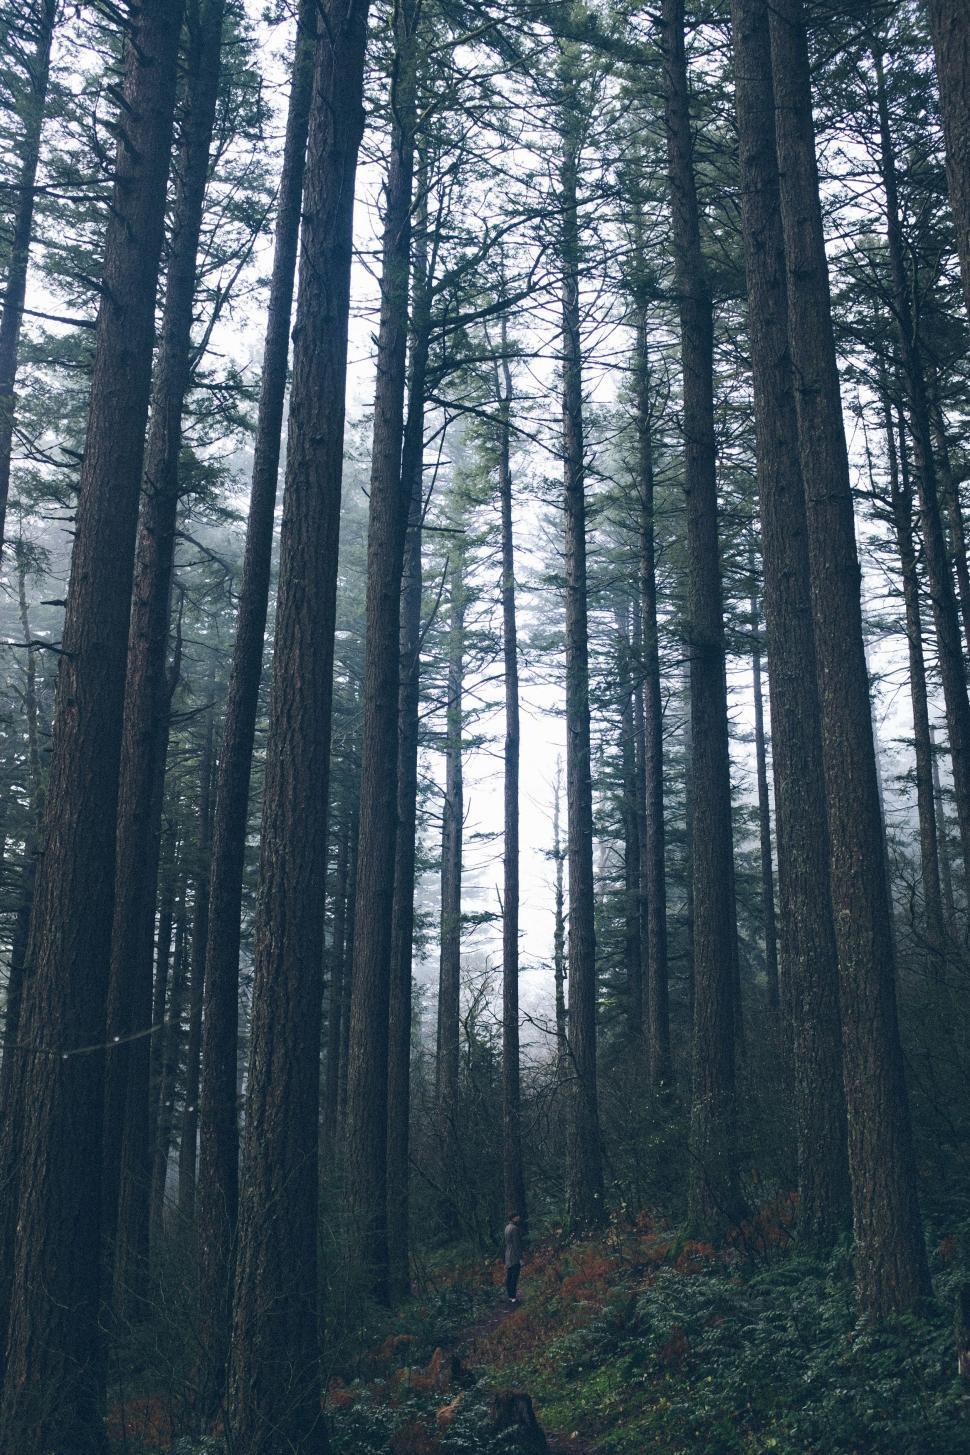 Free Image of Tall Trees Towering in a Dense Forest 